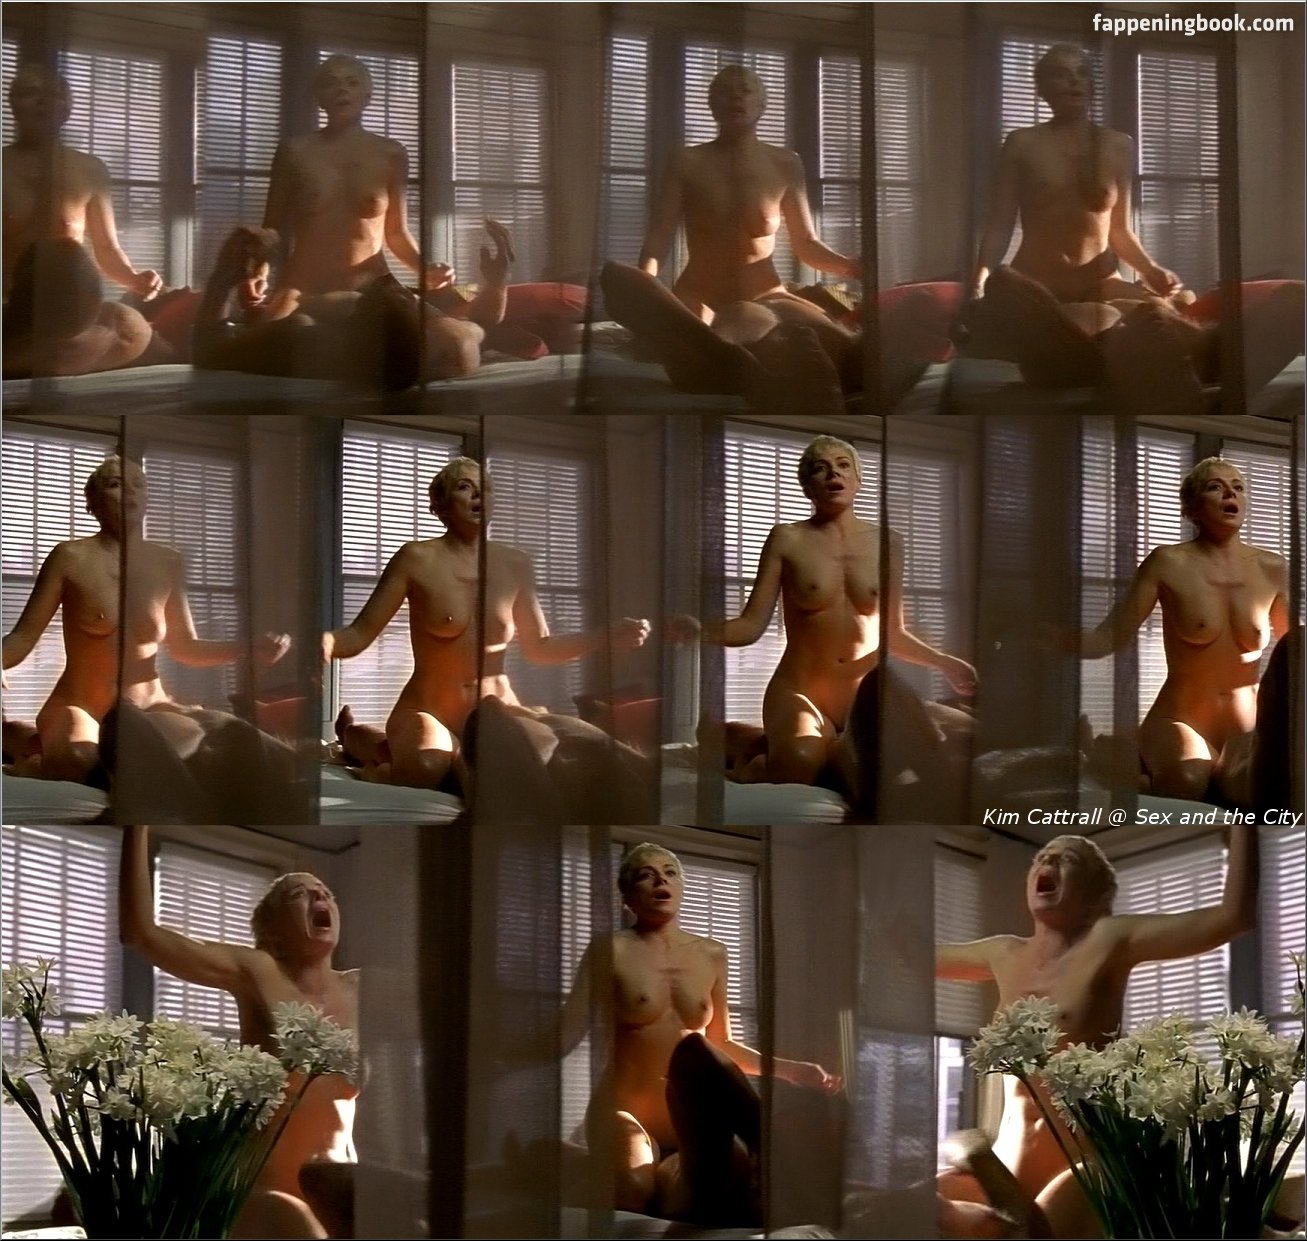 Kim Cattrall Nude, The Fappening - Photo #309982 - FappeningBook.